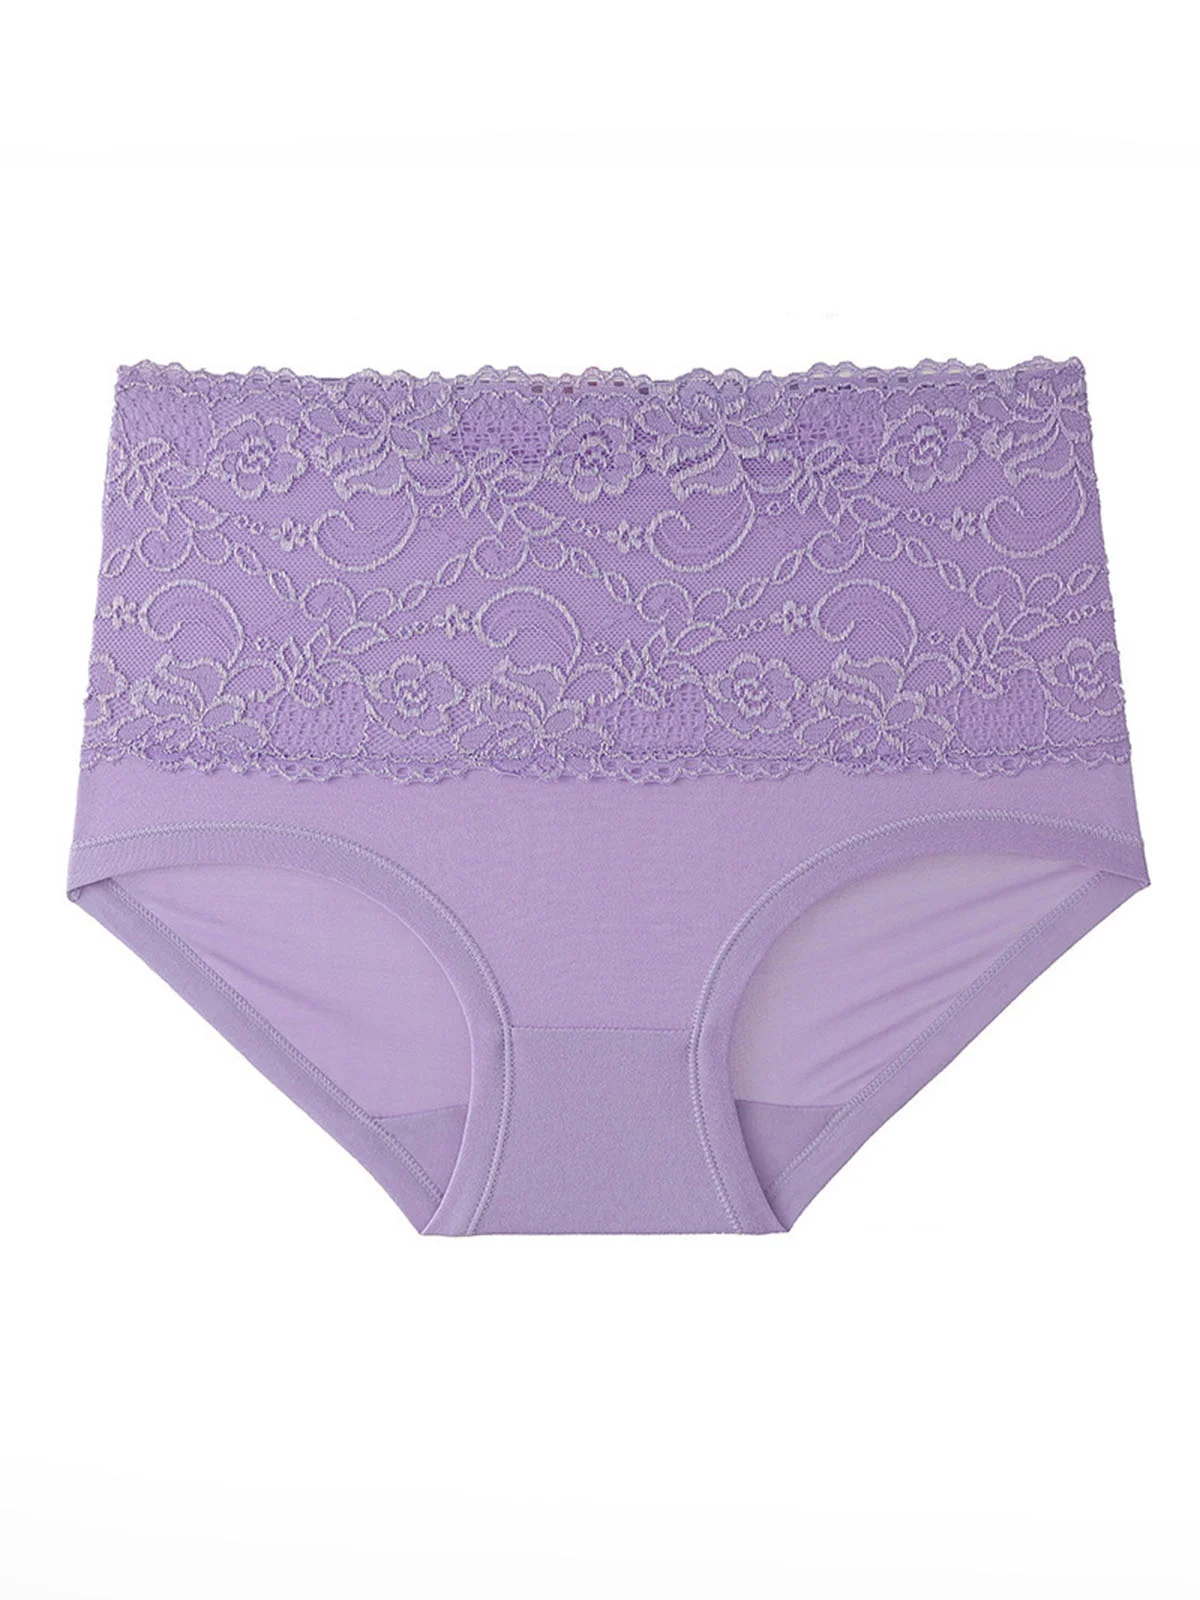 Comfortable Soft Lace High Waist Brief